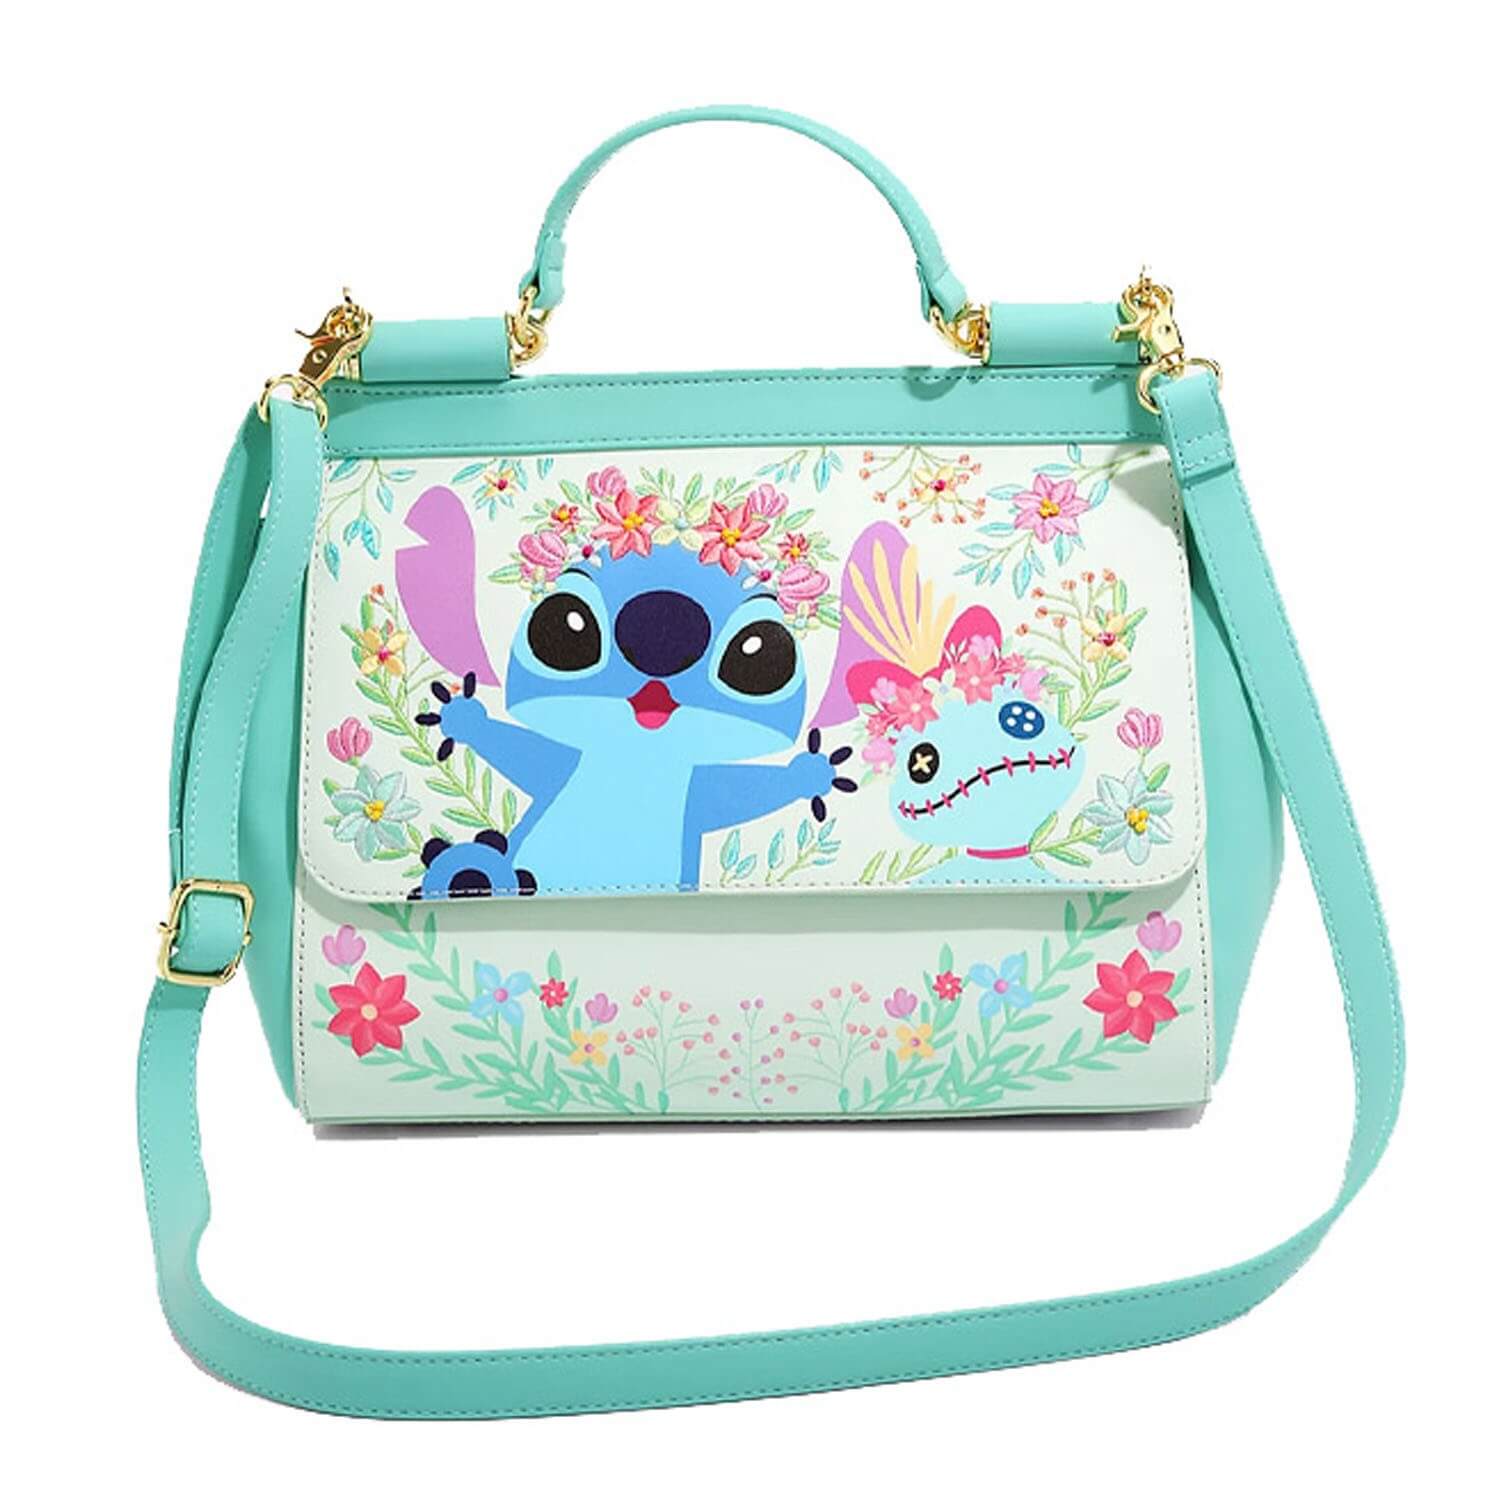 https://www.foxchip-collector.com/134184/sac-a-main-disney-lilo-and-stitch-scrump-pineapple-excluloungefly-disney.jpg